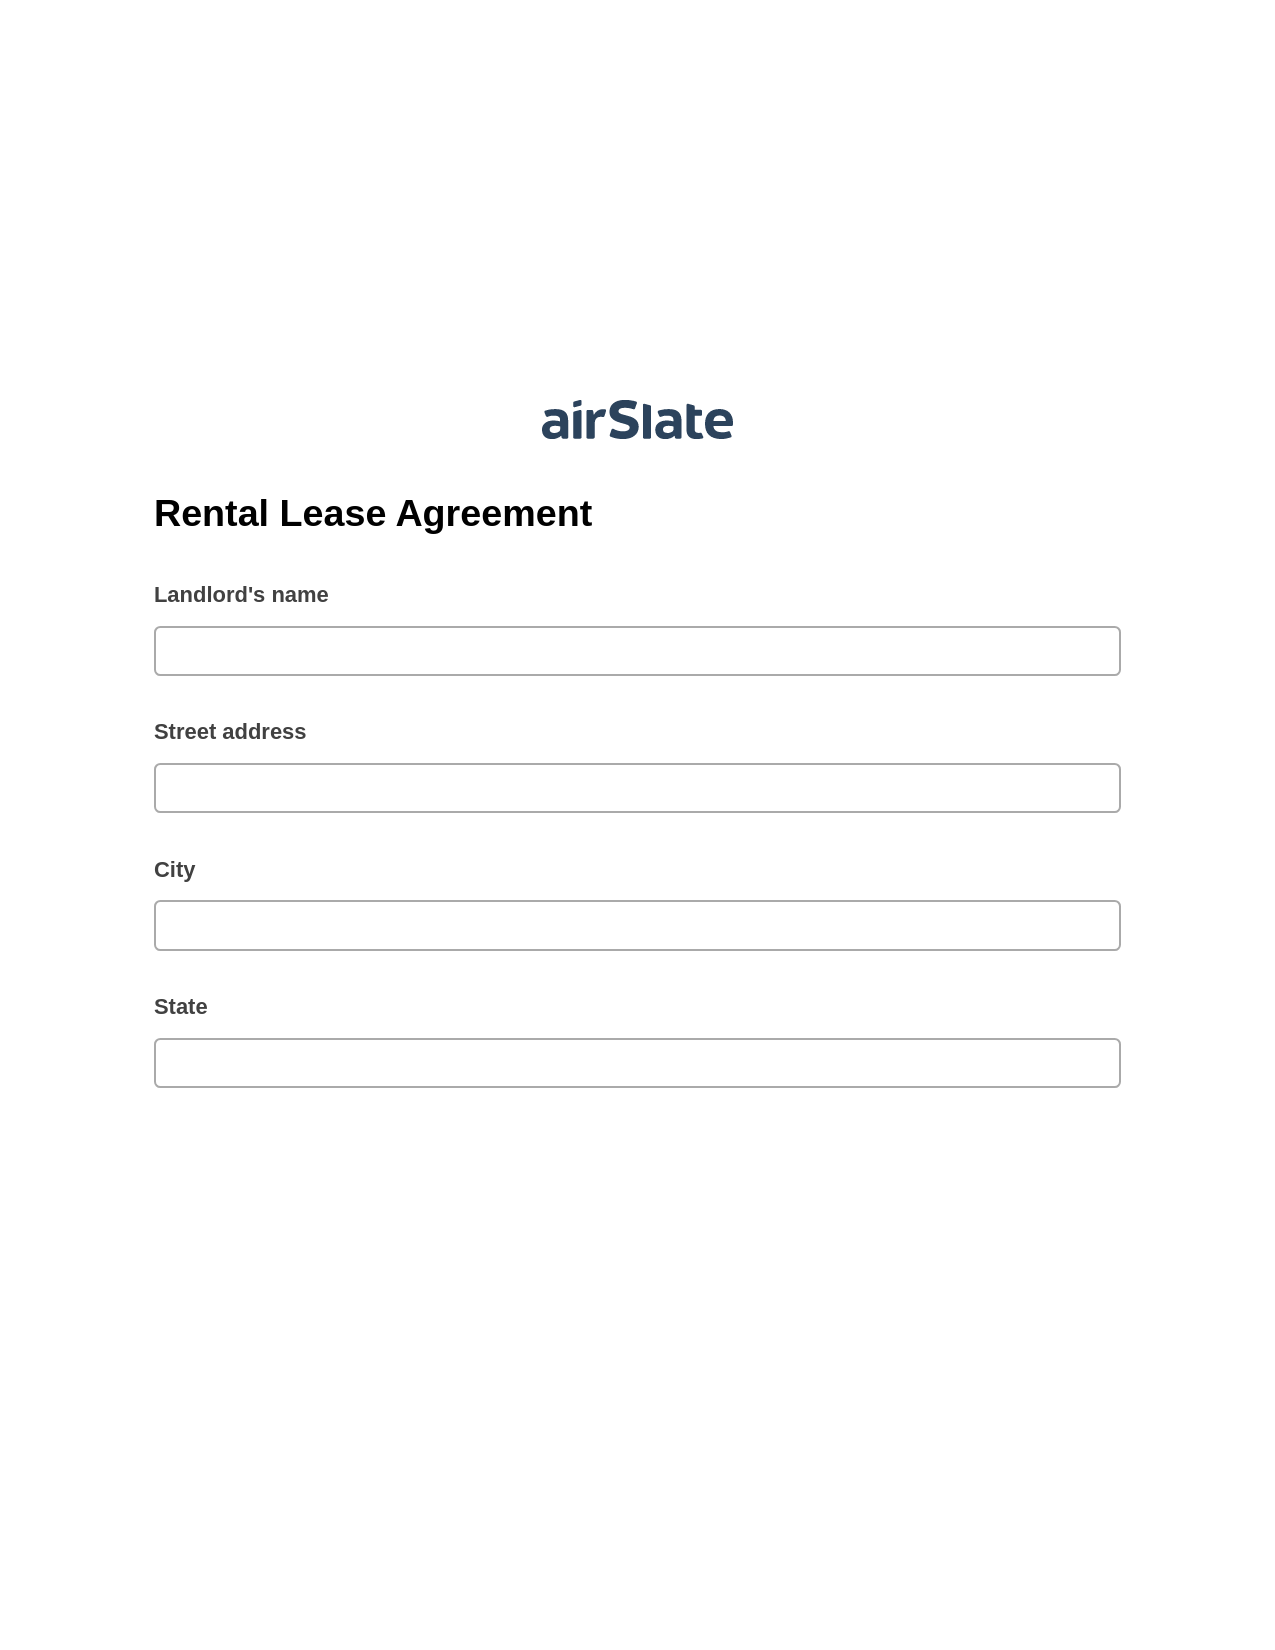 Rental Lease Agreement Pre-fill Dropdown from Airtable, Jira Bot, Webhook Postfinish Bot